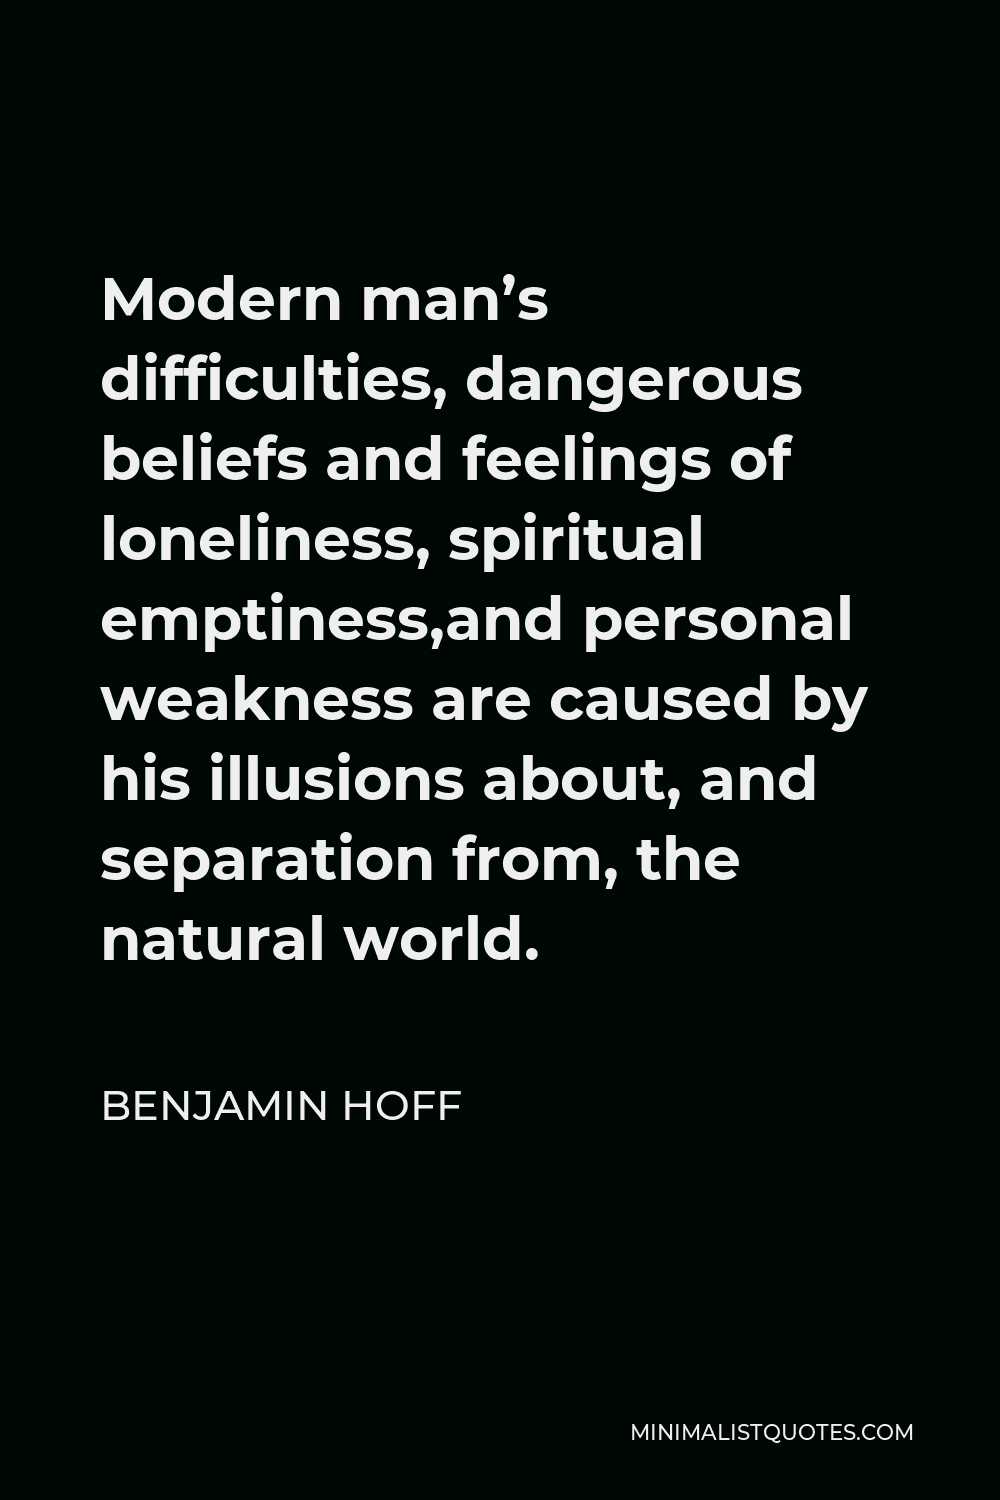 Benjamin Hoff Quote - Modern man’s difficulties, dangerous beliefs and feelings of loneliness, spiritual emptiness,and personal weakness are caused by his illusions about, and separation from, the natural world.